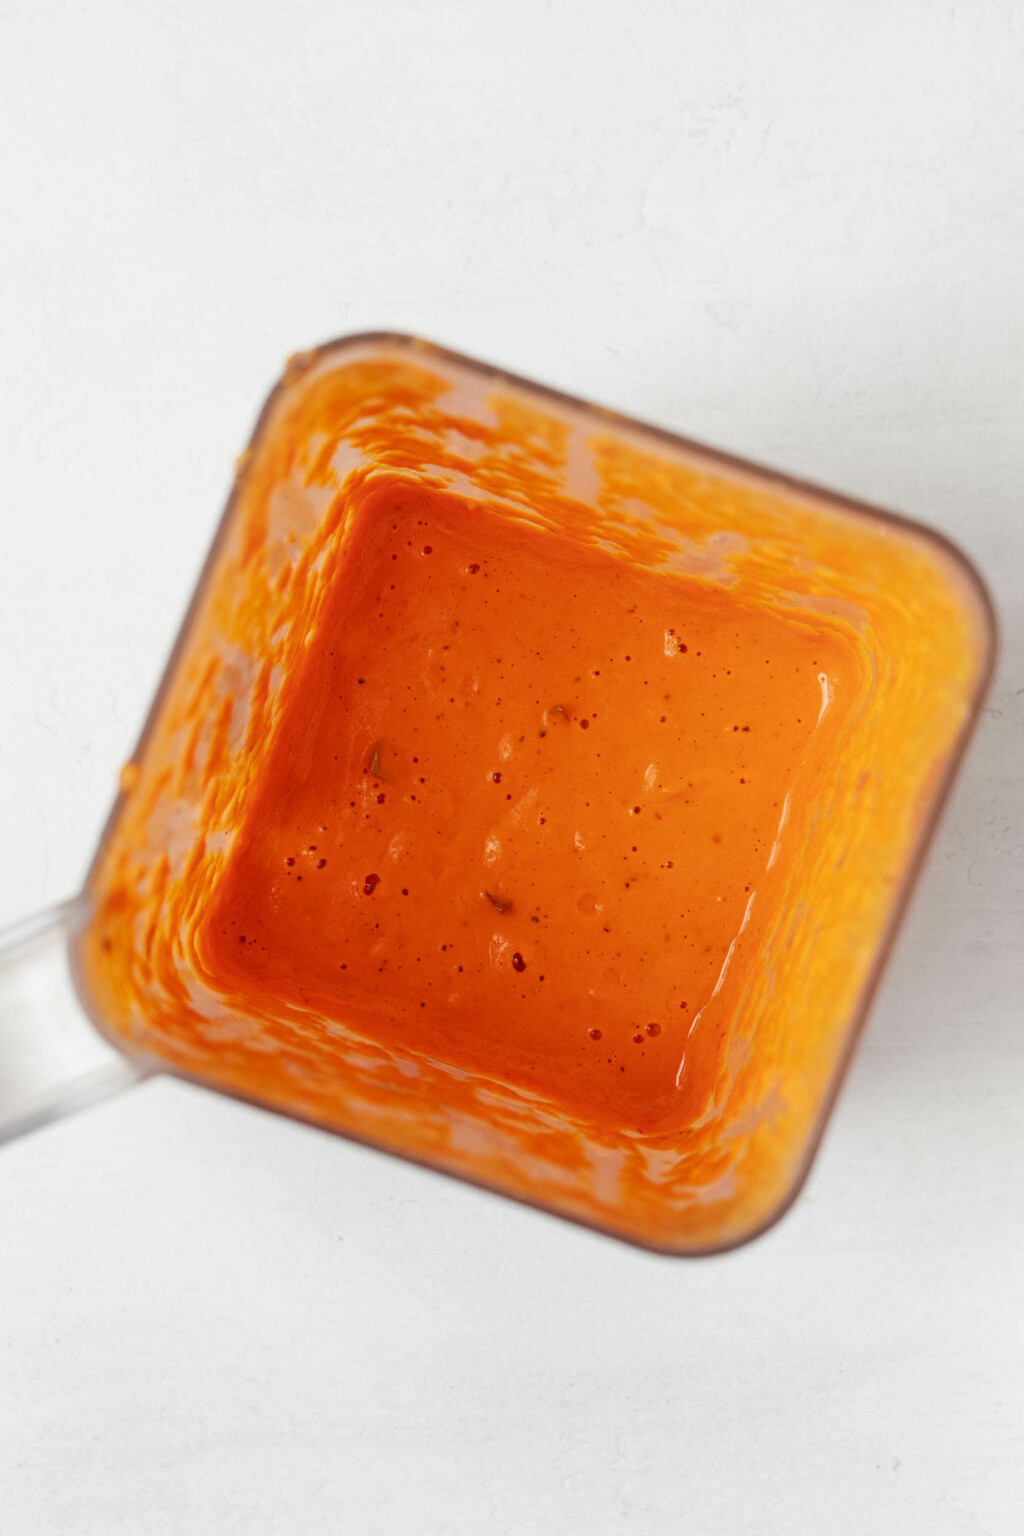 An overhead image of a blender container, which has a square-shaped mouth. The container holds an orange-colored sauce.